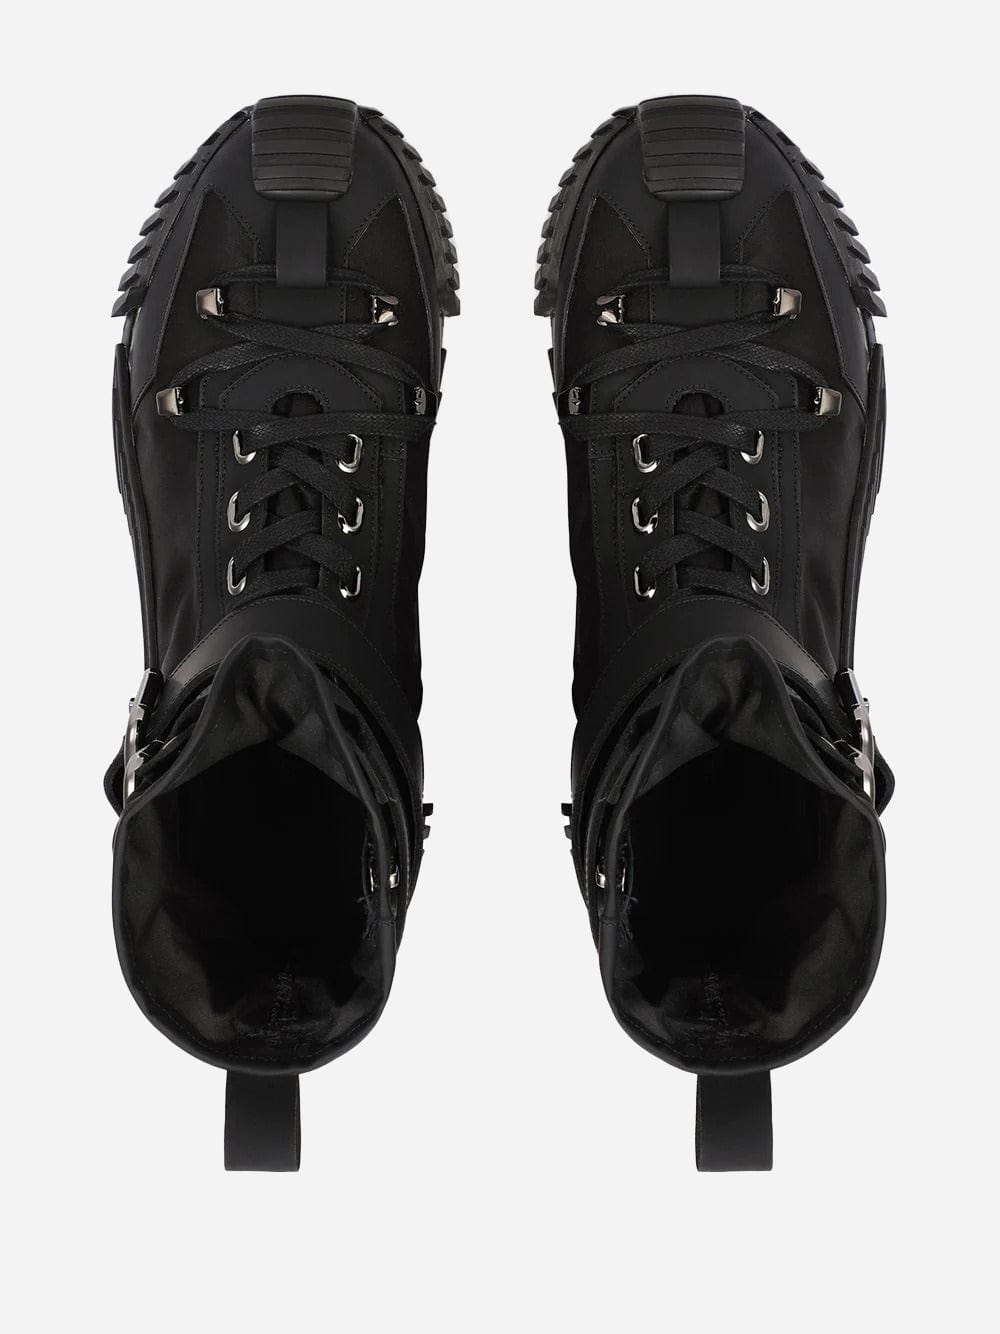 Dolce & Gabbana Buckle-Detail High-Top Sneakers